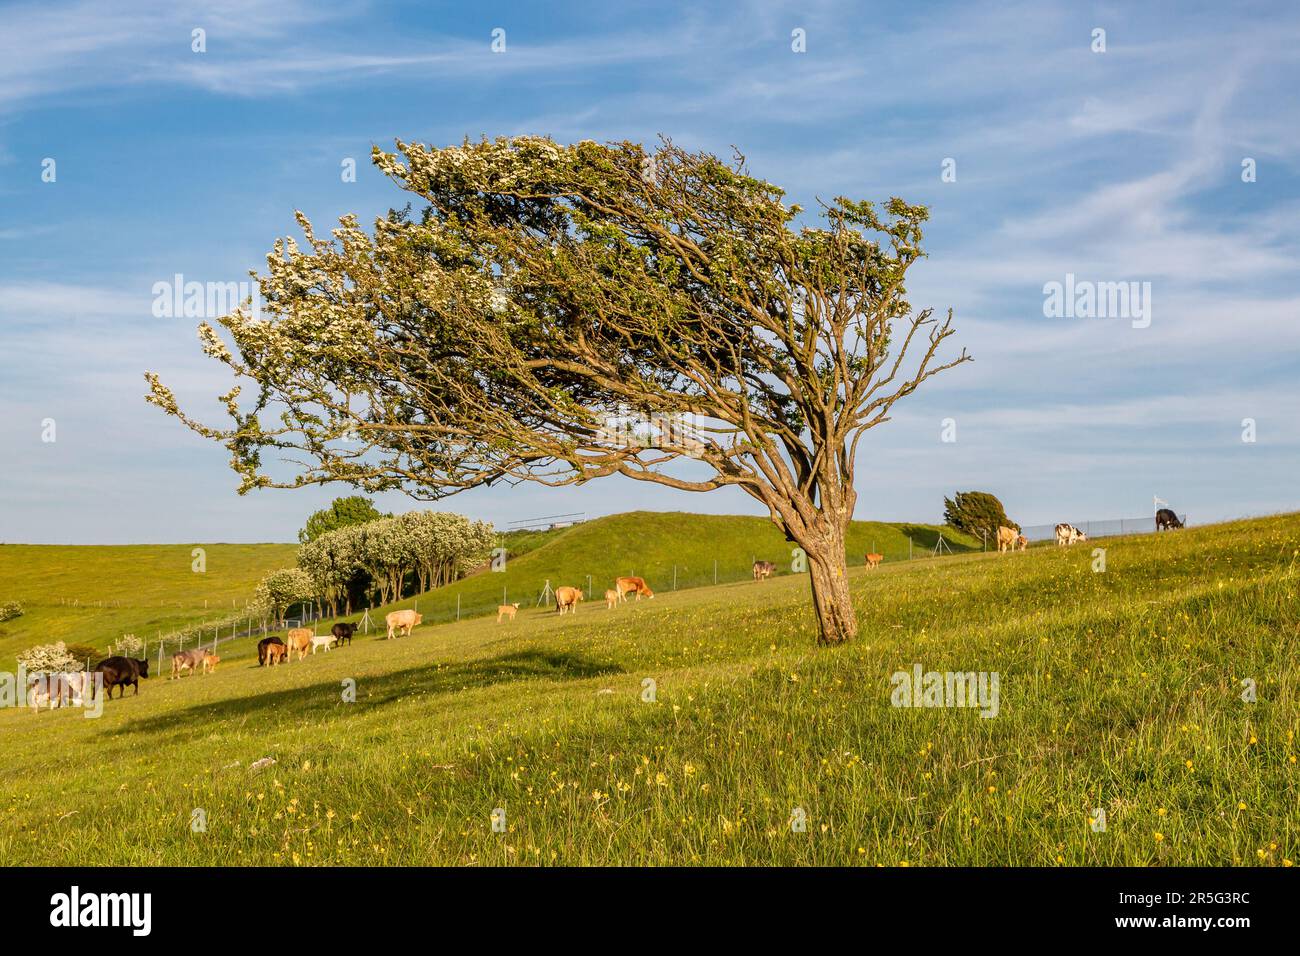 Cattle grazing on Firle Beacon in Sussex, with a windswept hawthorn tree in the foreground and a blue sky overhead Stock Photo